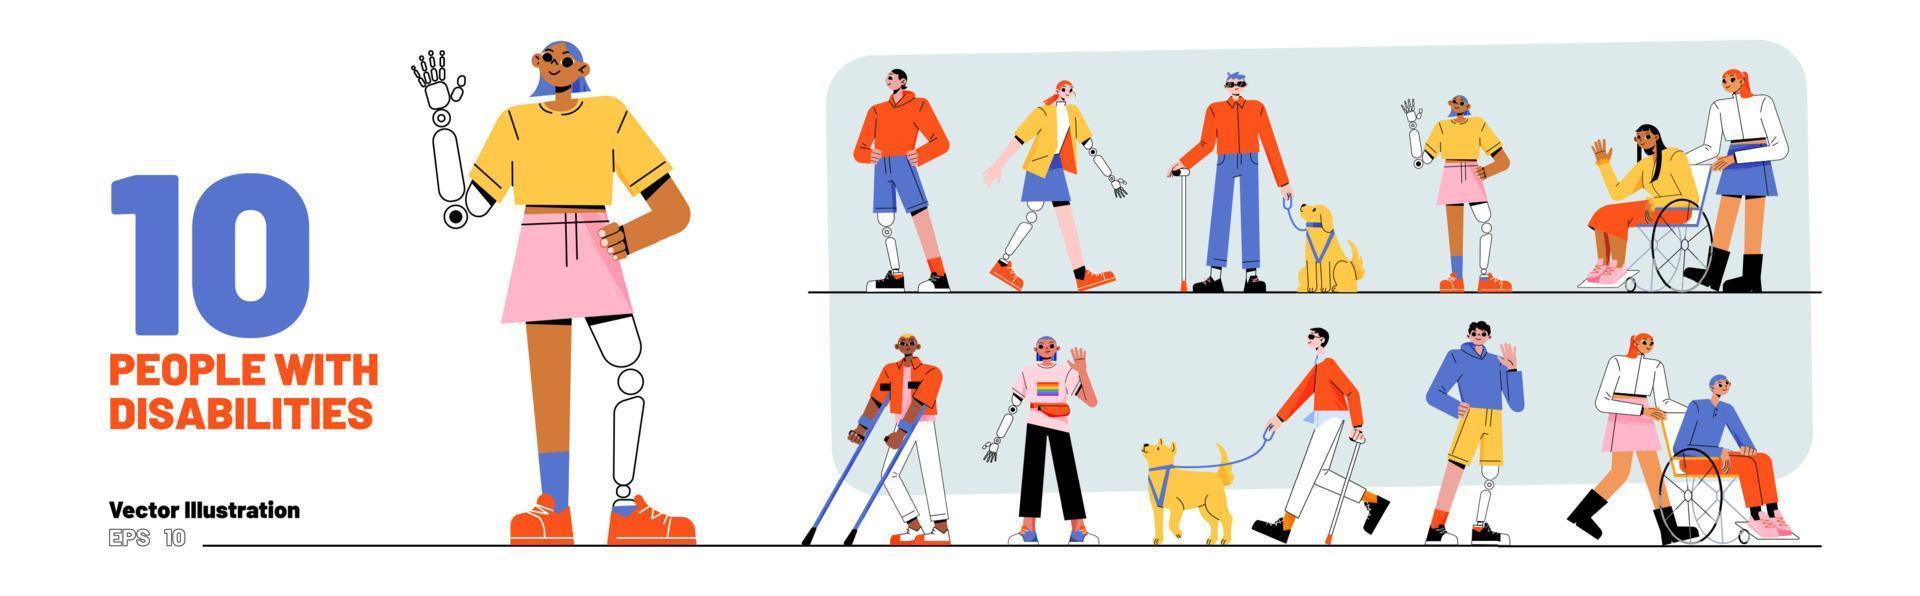 Diverse people with disabilities set vector